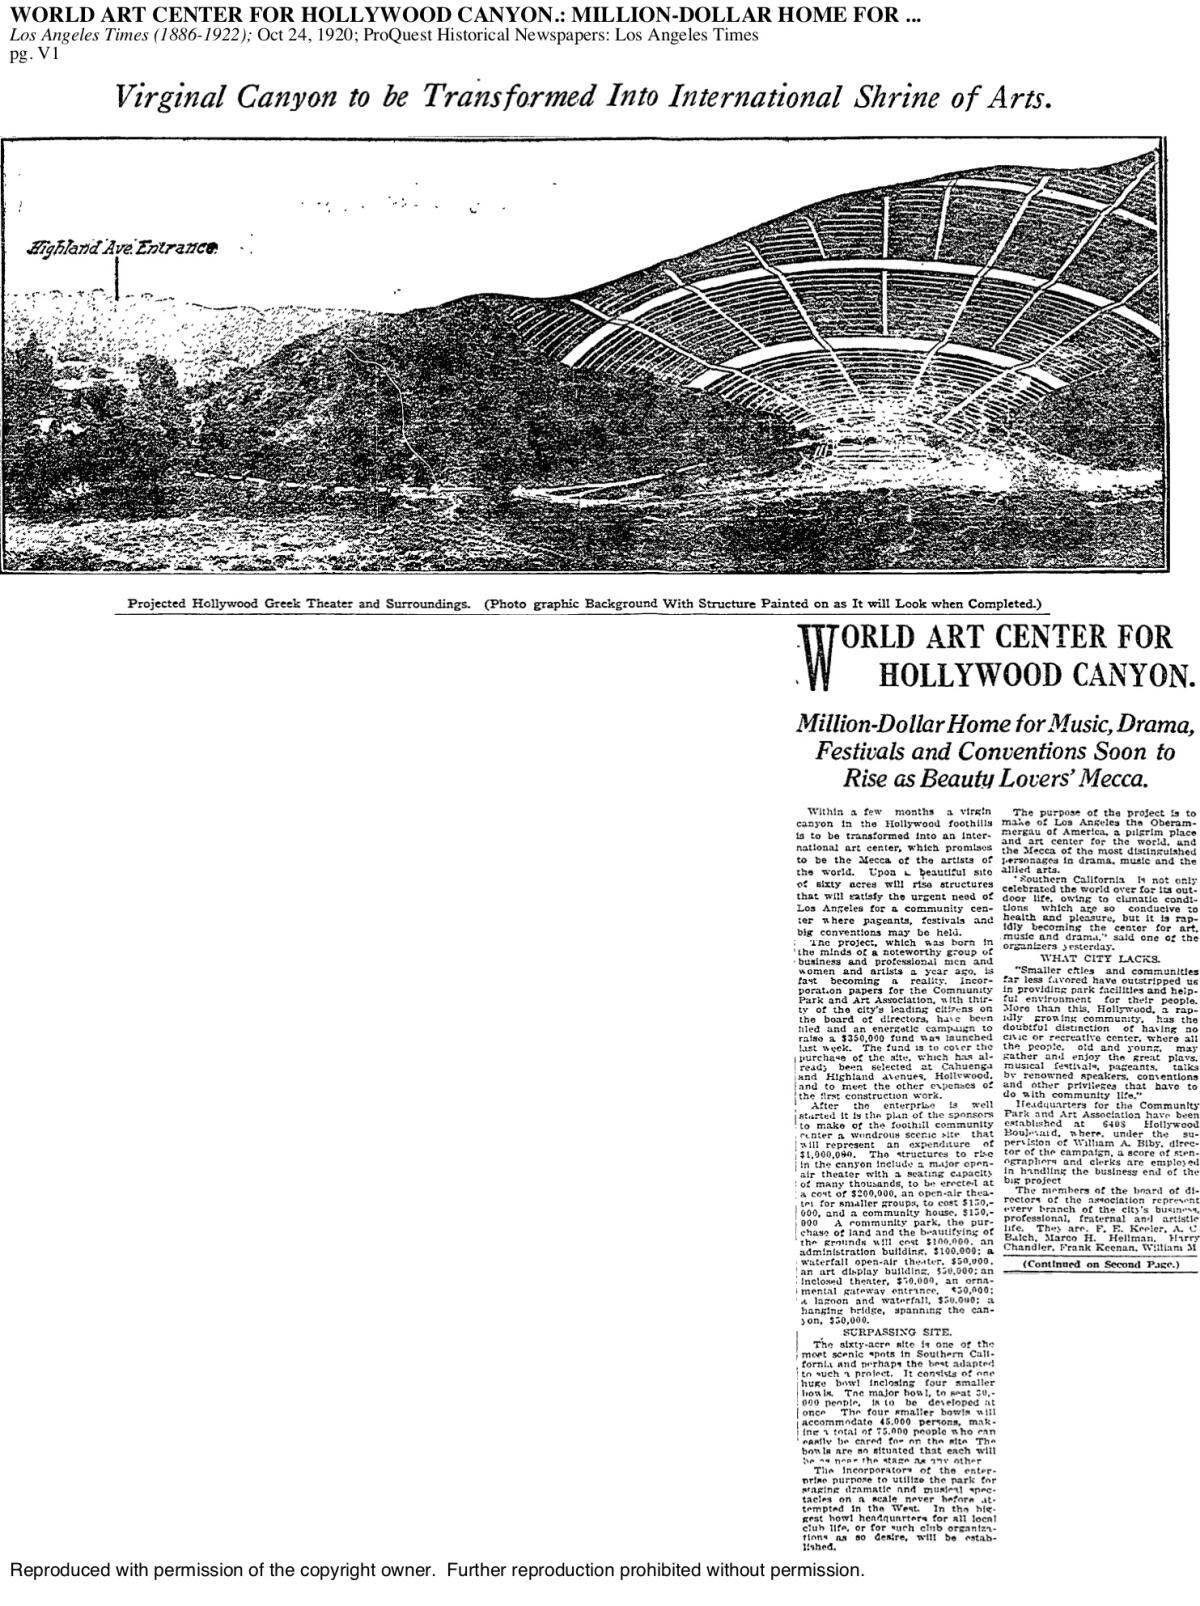 Oct. 24, 1920: The L.A. Times trumpets the construction of a "Mecca" for art lovers that was to become the Hollywood Bowl.